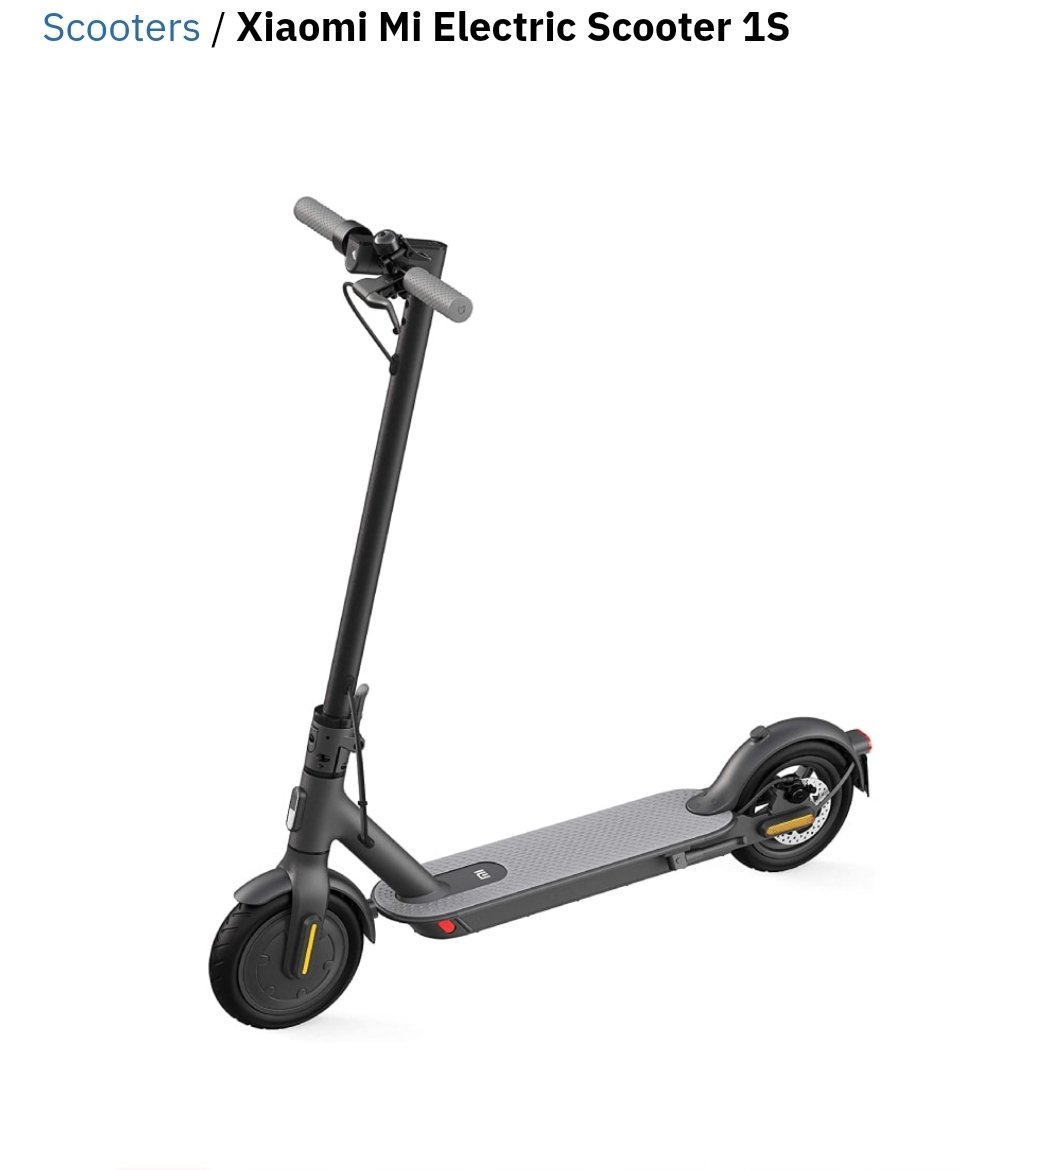 Xiaomi electric scooter 1s